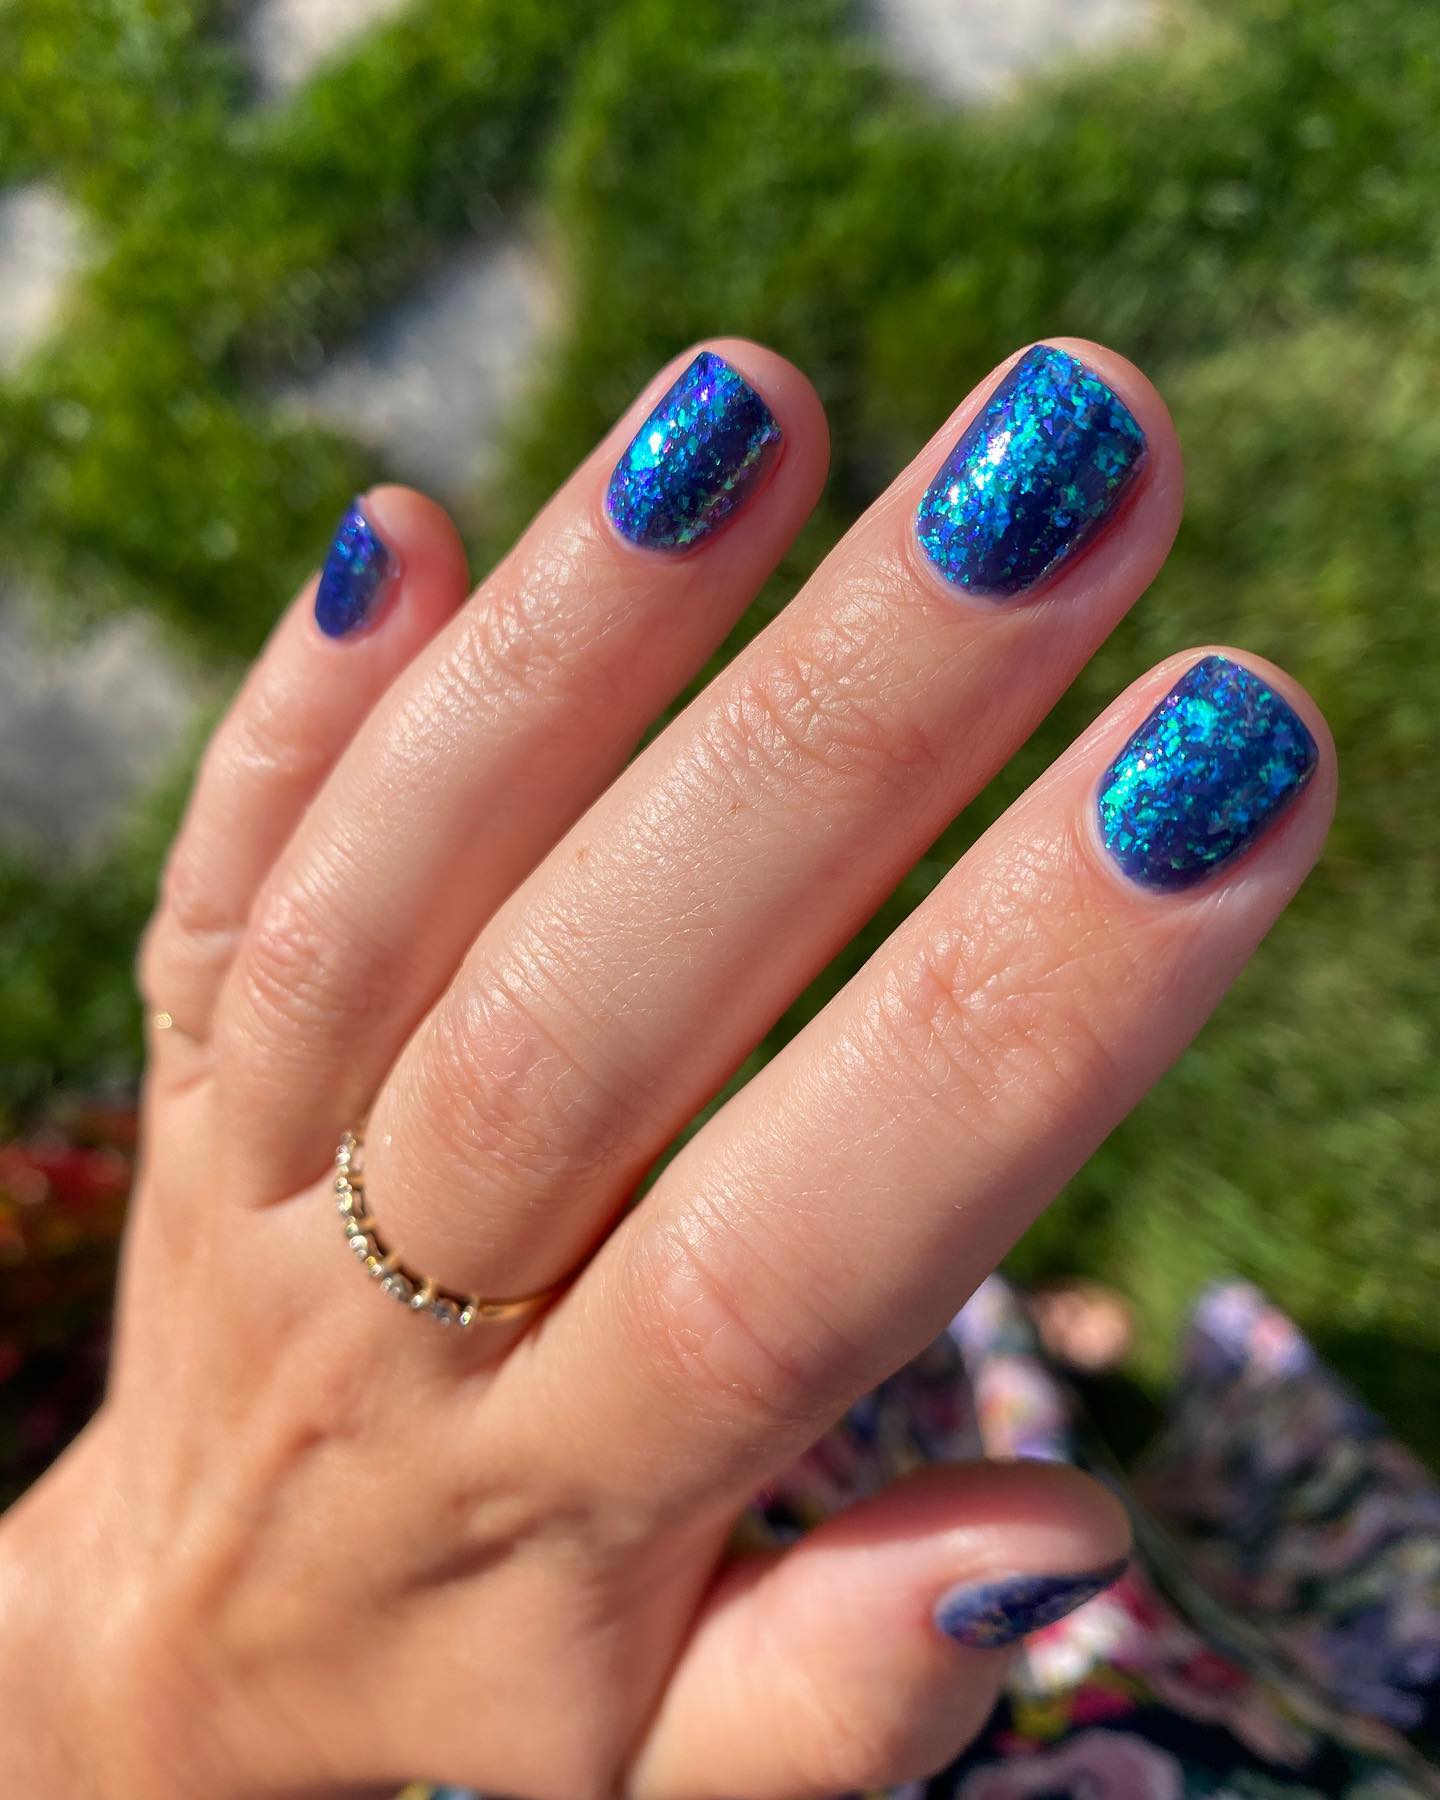 Navy blue glitters are a type of glitter that's very dark and almost looks like it has a hint of black in it. It's a really popular color for people who want to add a little bit of color without going overboard.